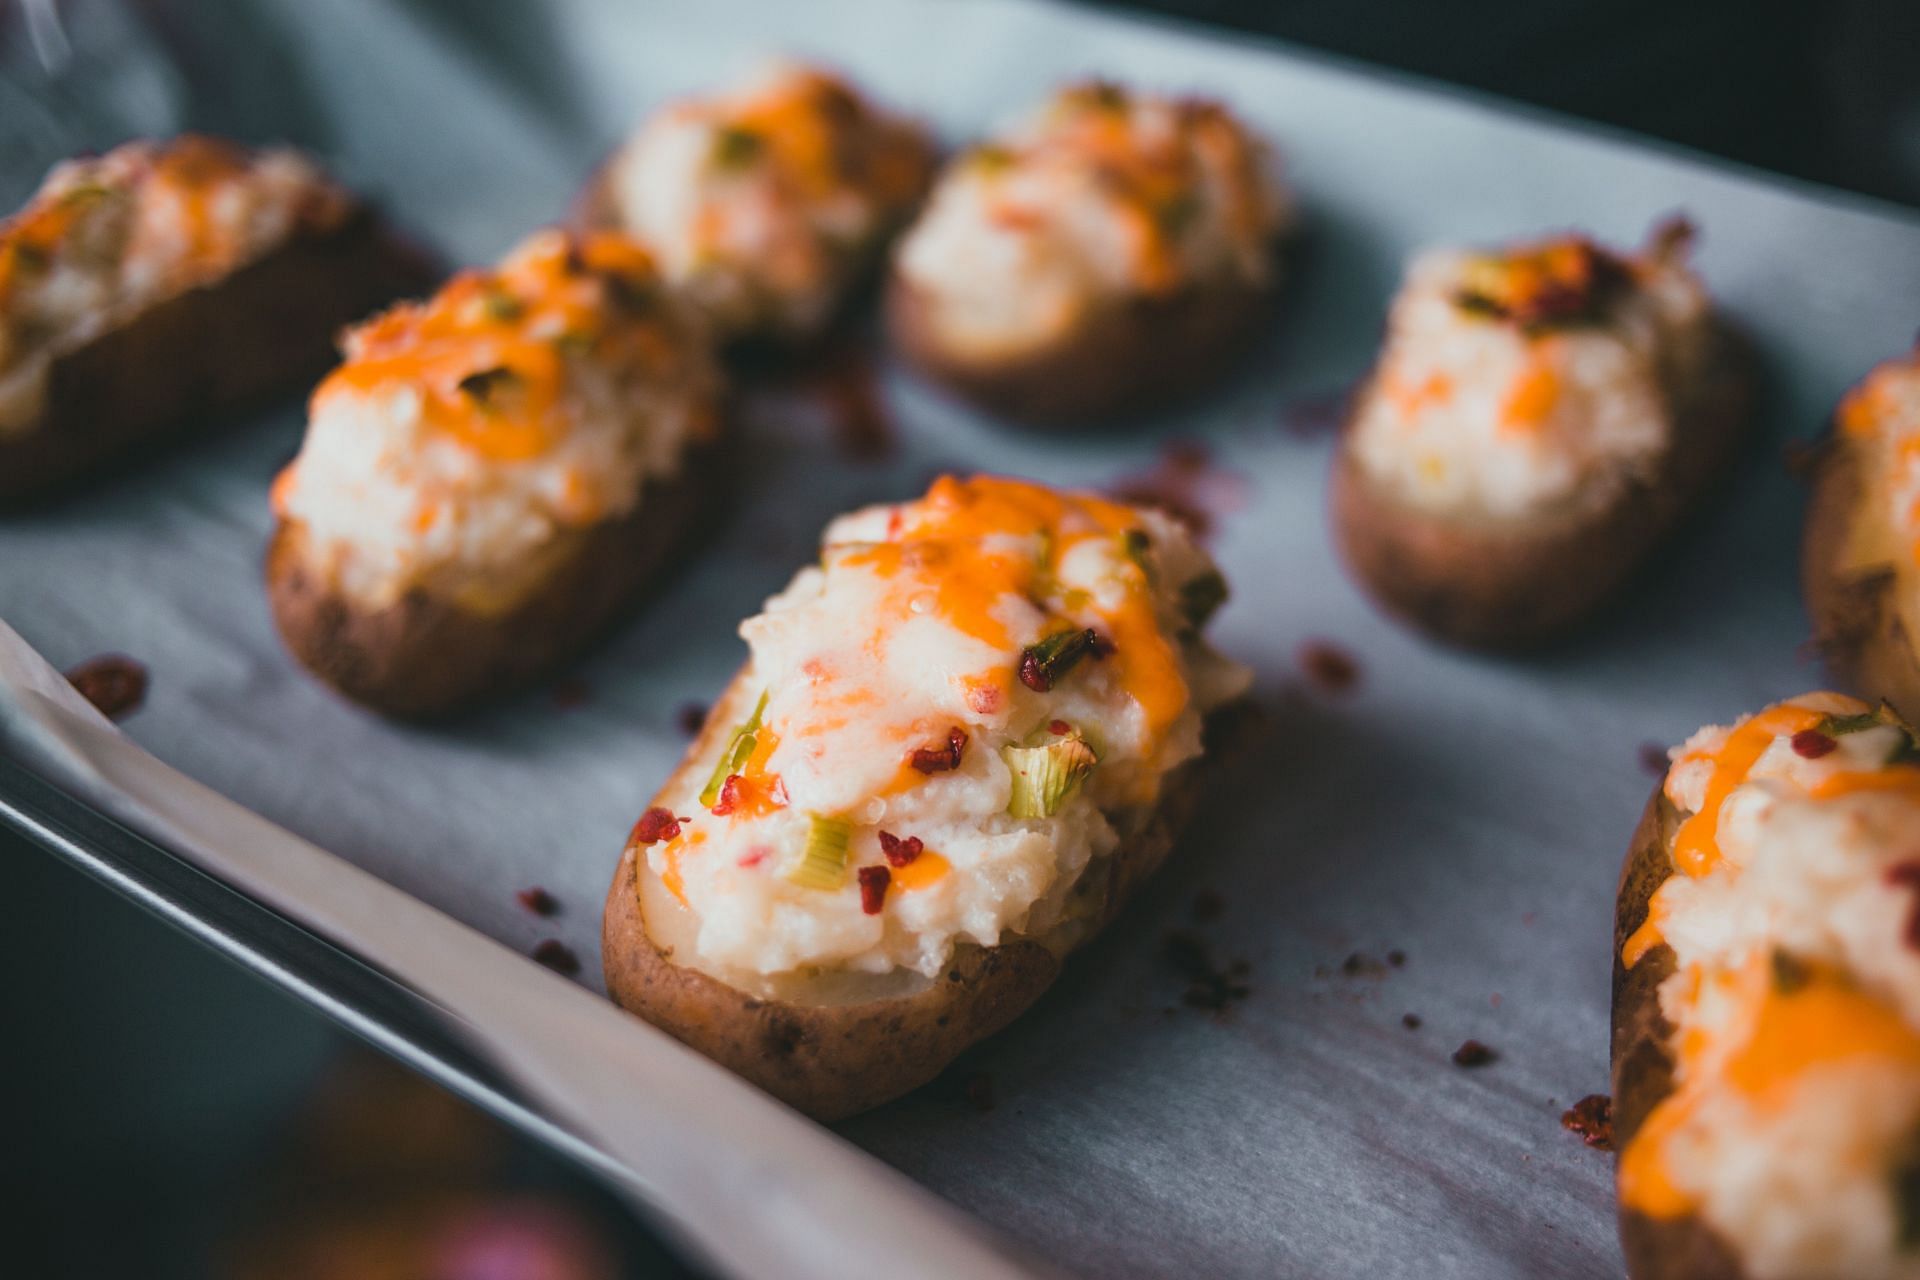 Potato-Based Dishes That Will Impress Your Guests (Image via Pexels)